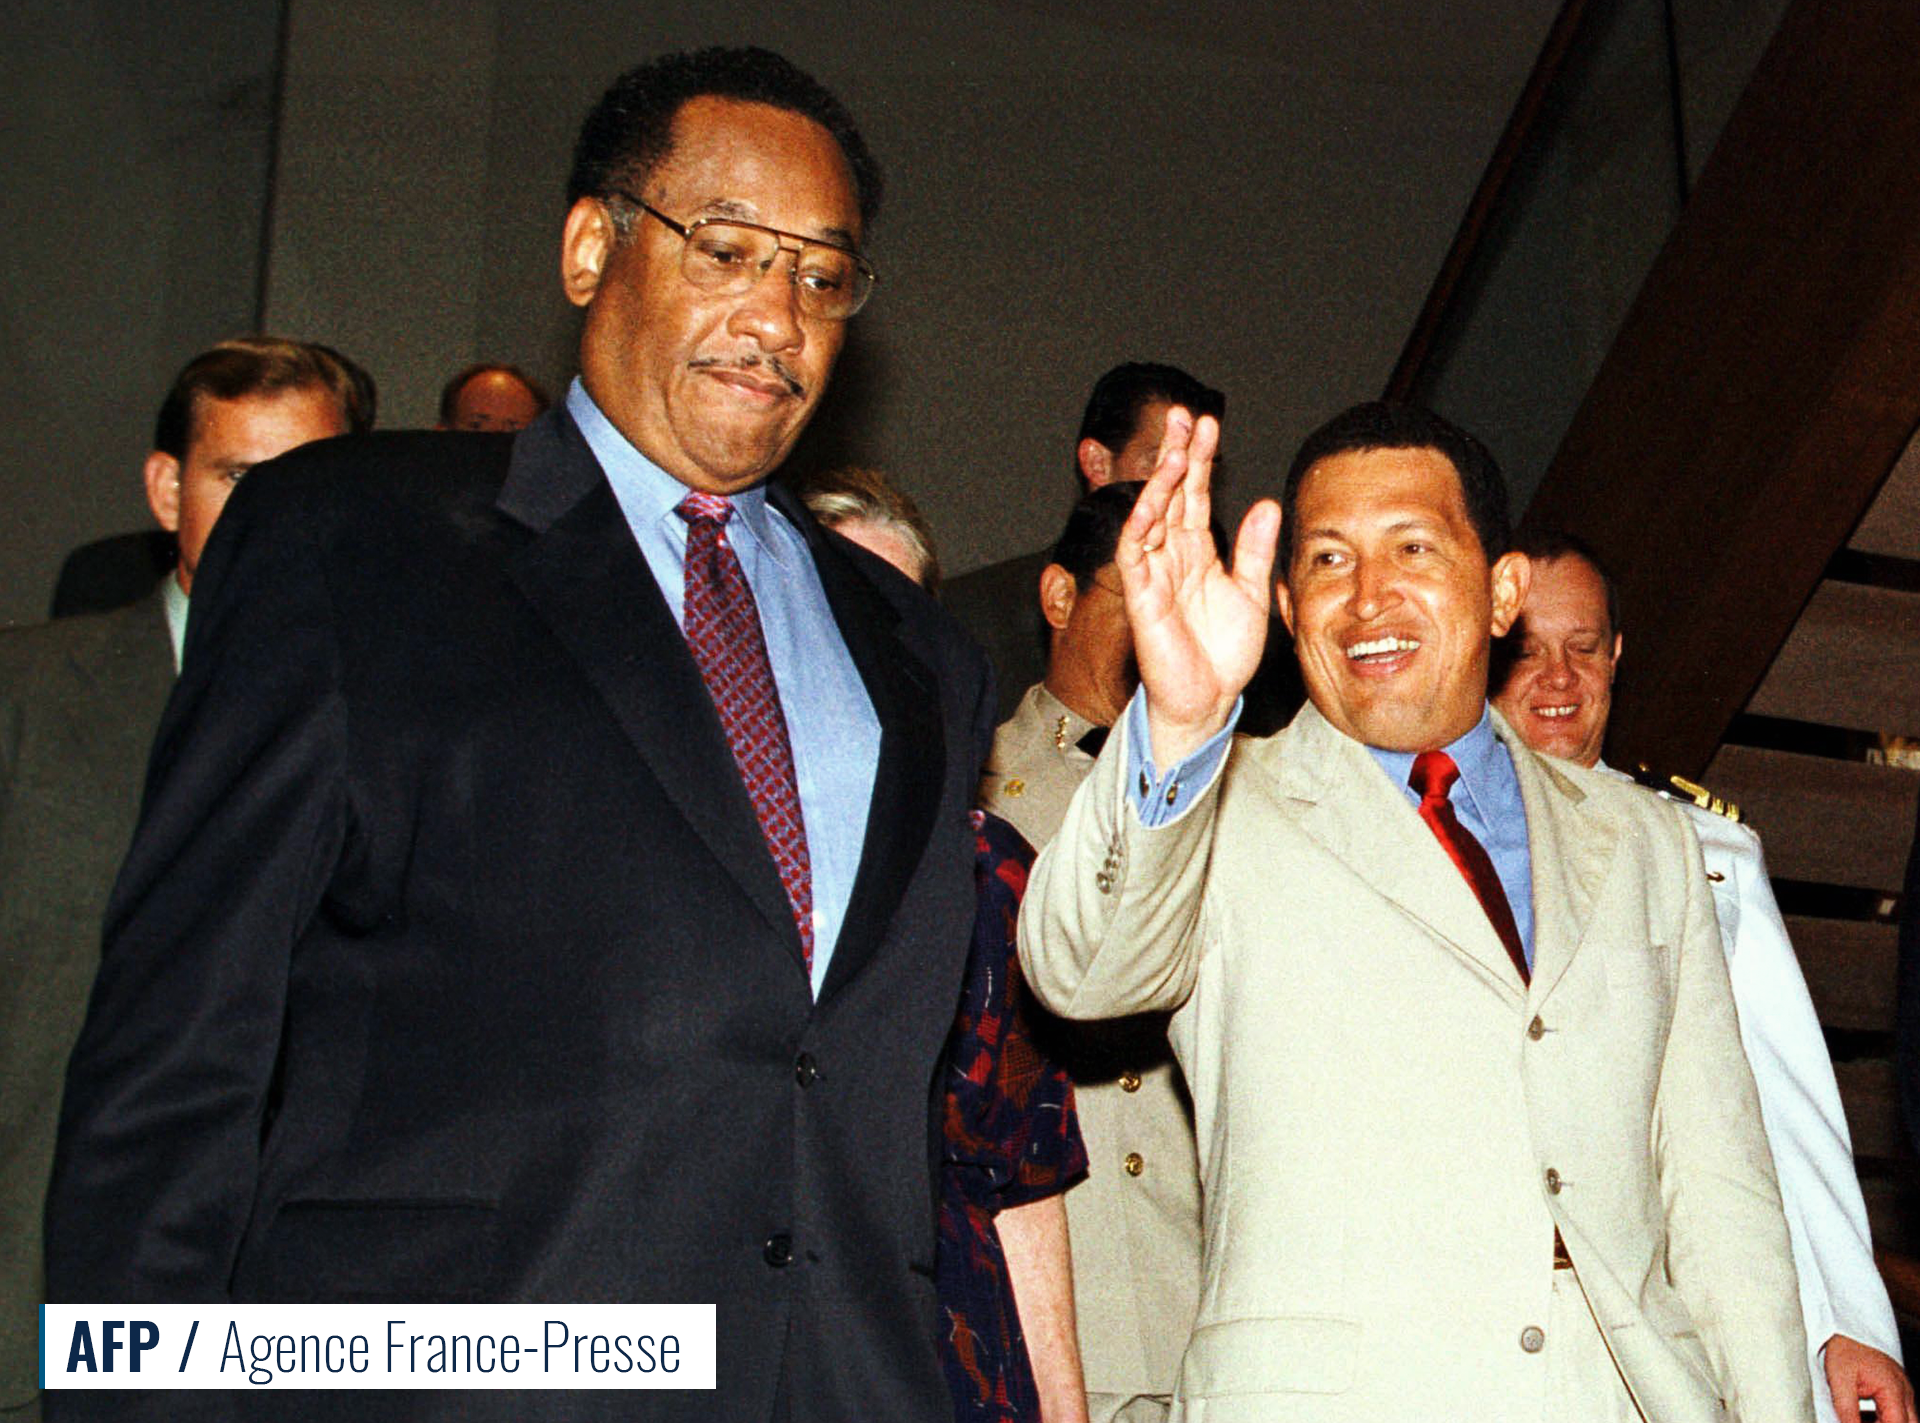 Venezuelan President Hugo Chavez's first visit to the city of Houston, Texas, on June 11, 1999. He was received by Houston Mayor Lee Brown.